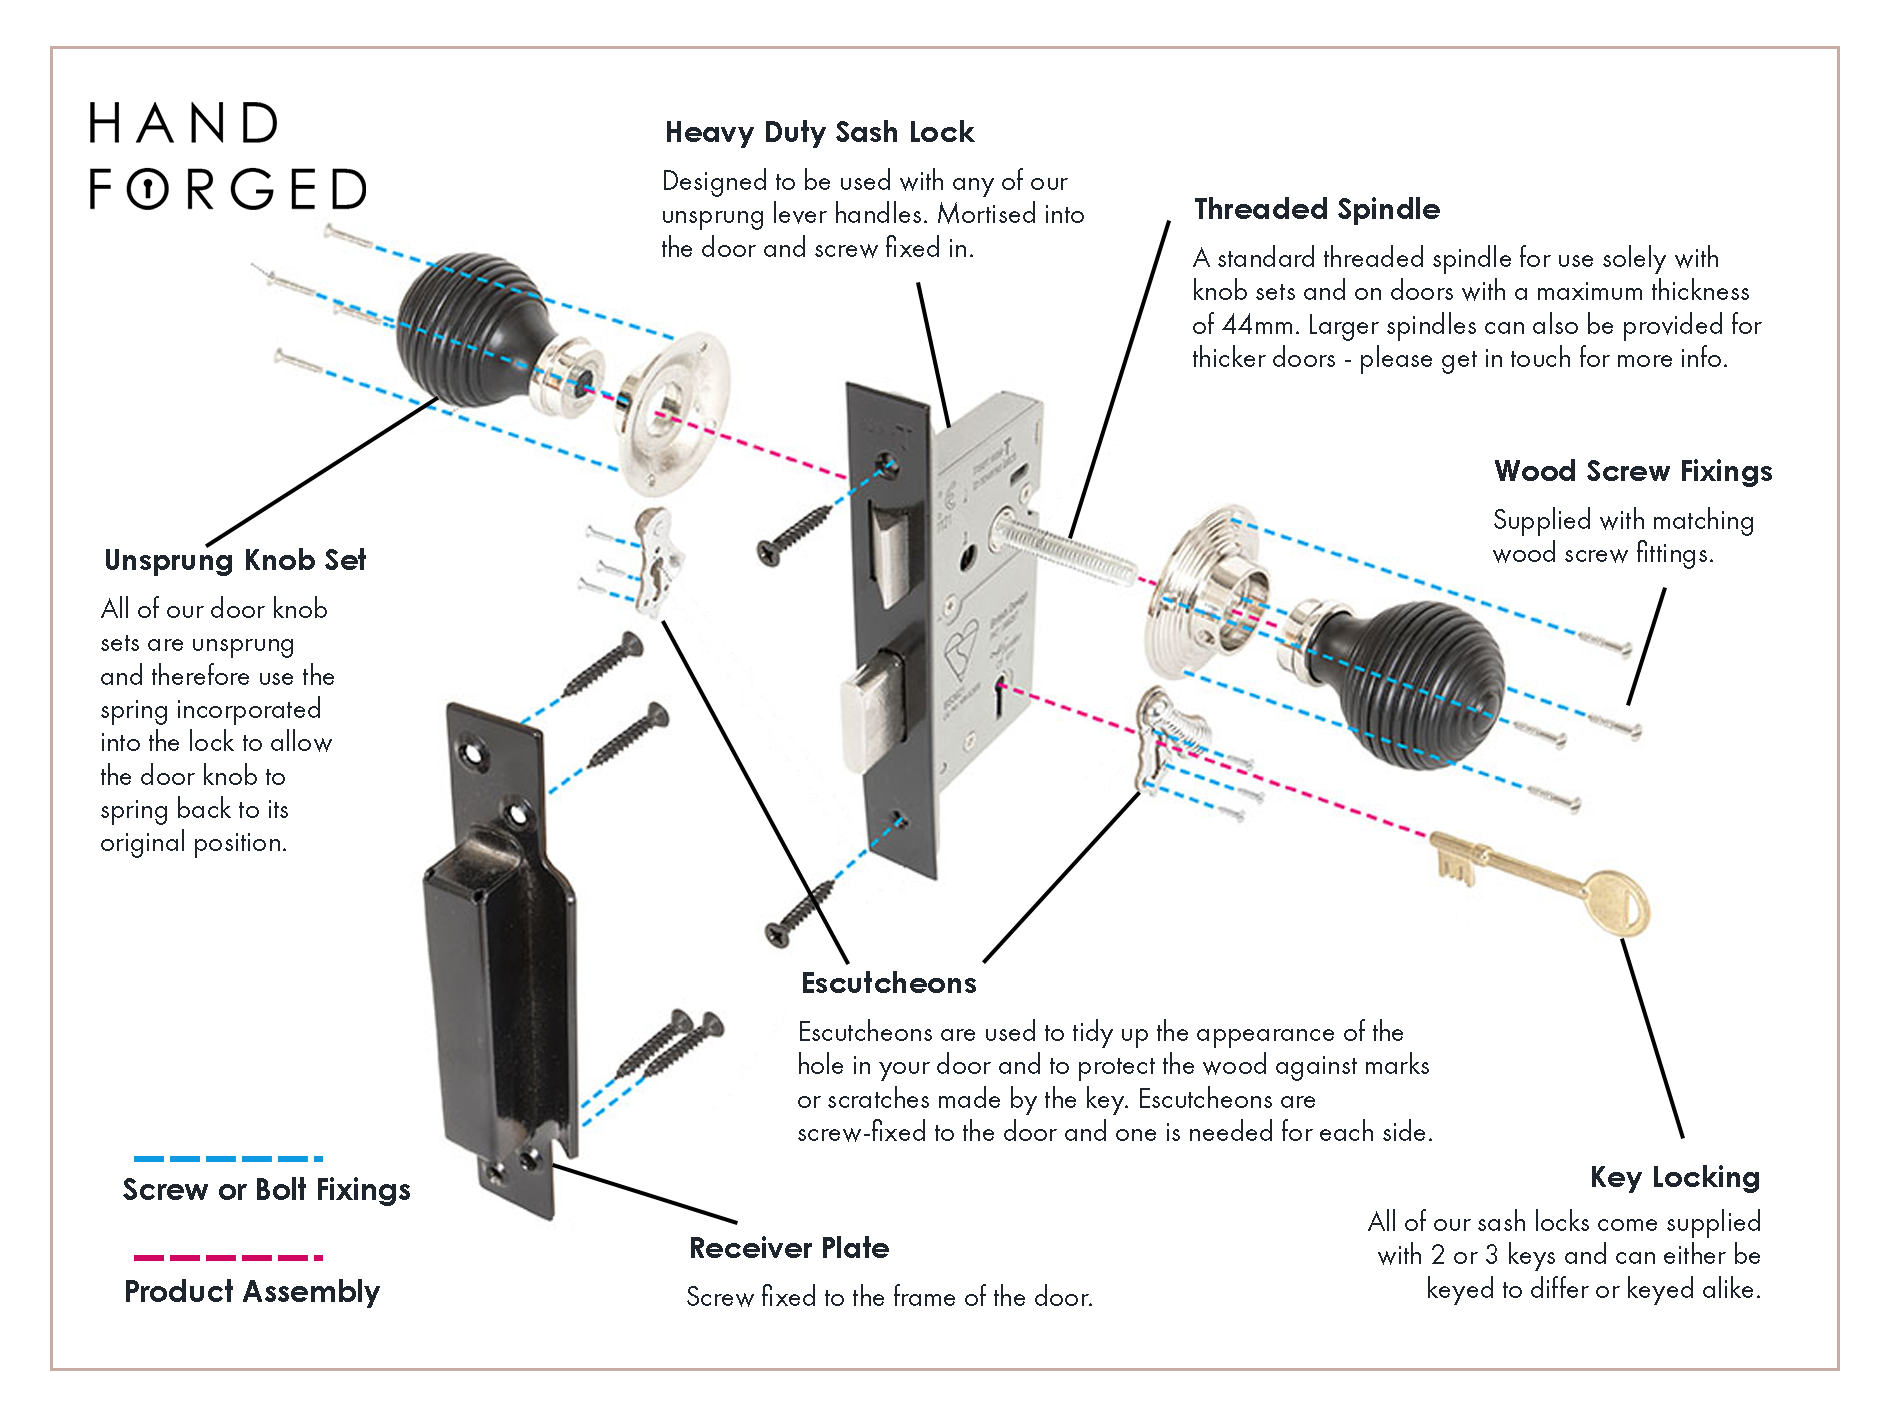 Exploded diagram of a black heavy duty sash lock with two ebony beehive door knobs. Each part of the products has a line pointing to it with a small descriptive line about its function